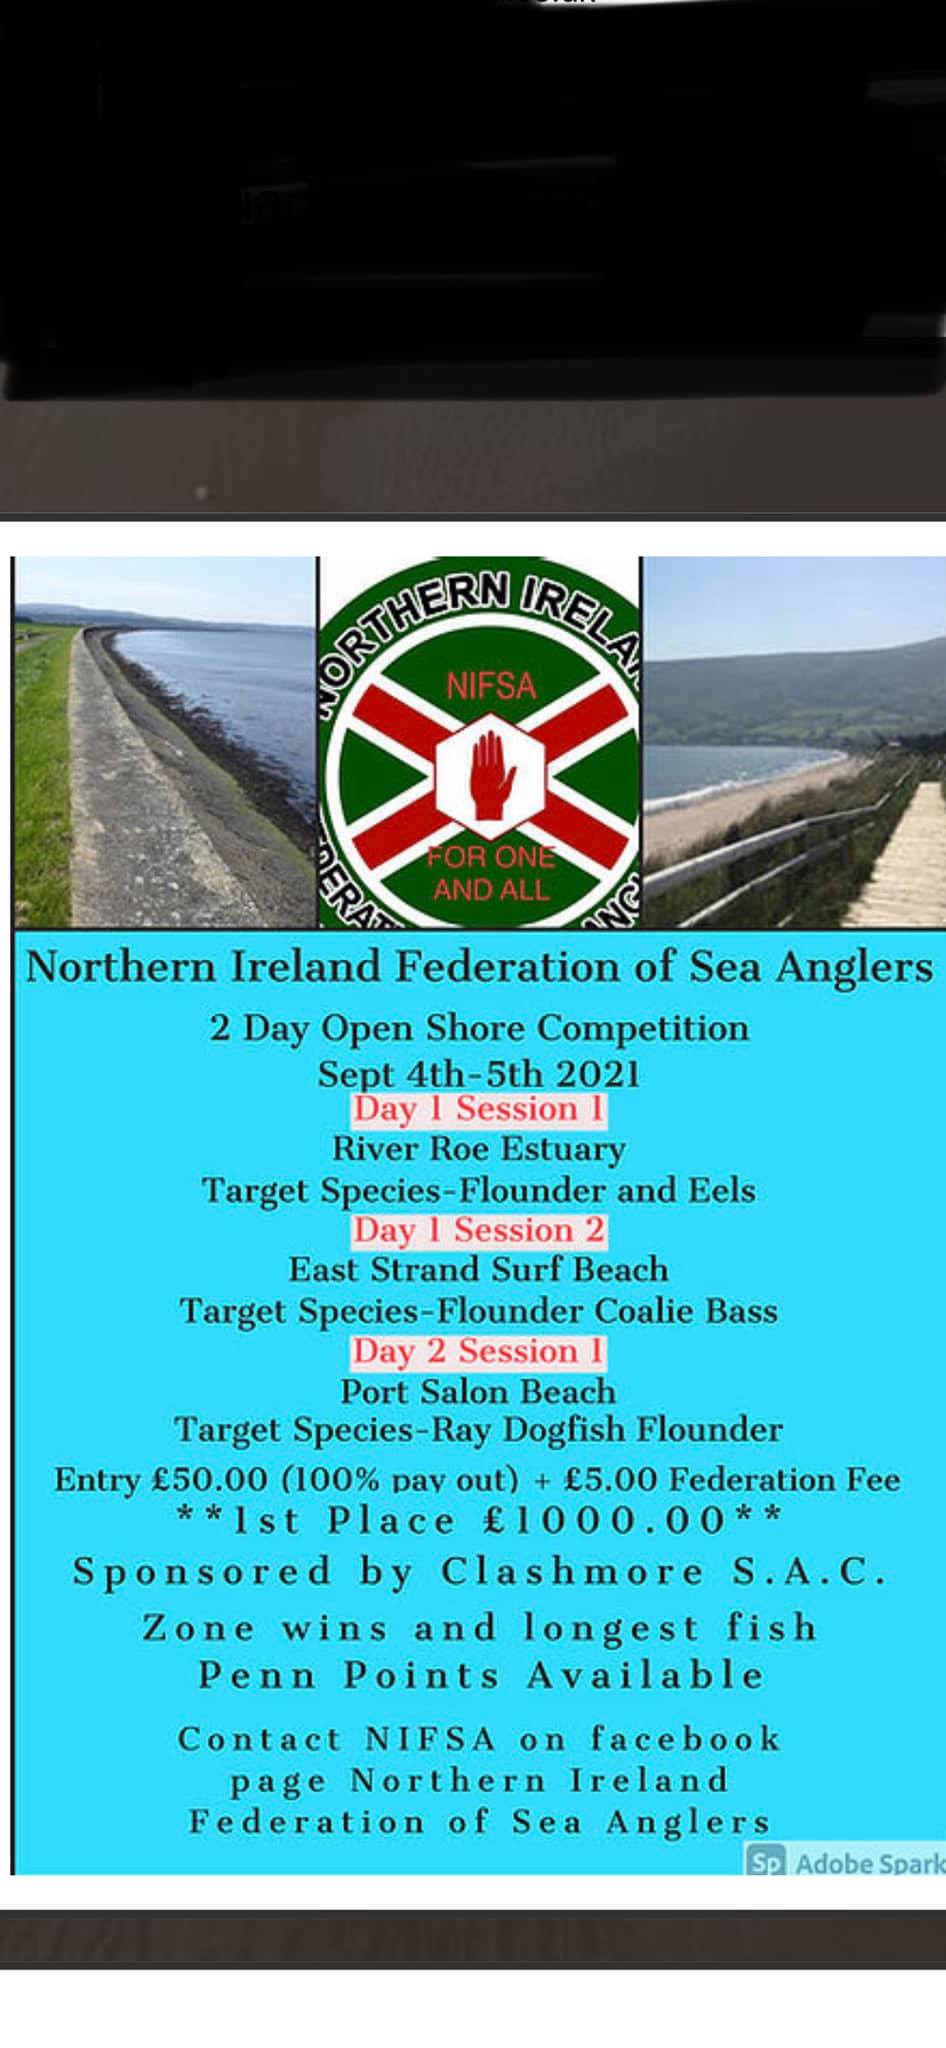 Our annual NIFSA 2 Day Open Shore Festival is now open for entries